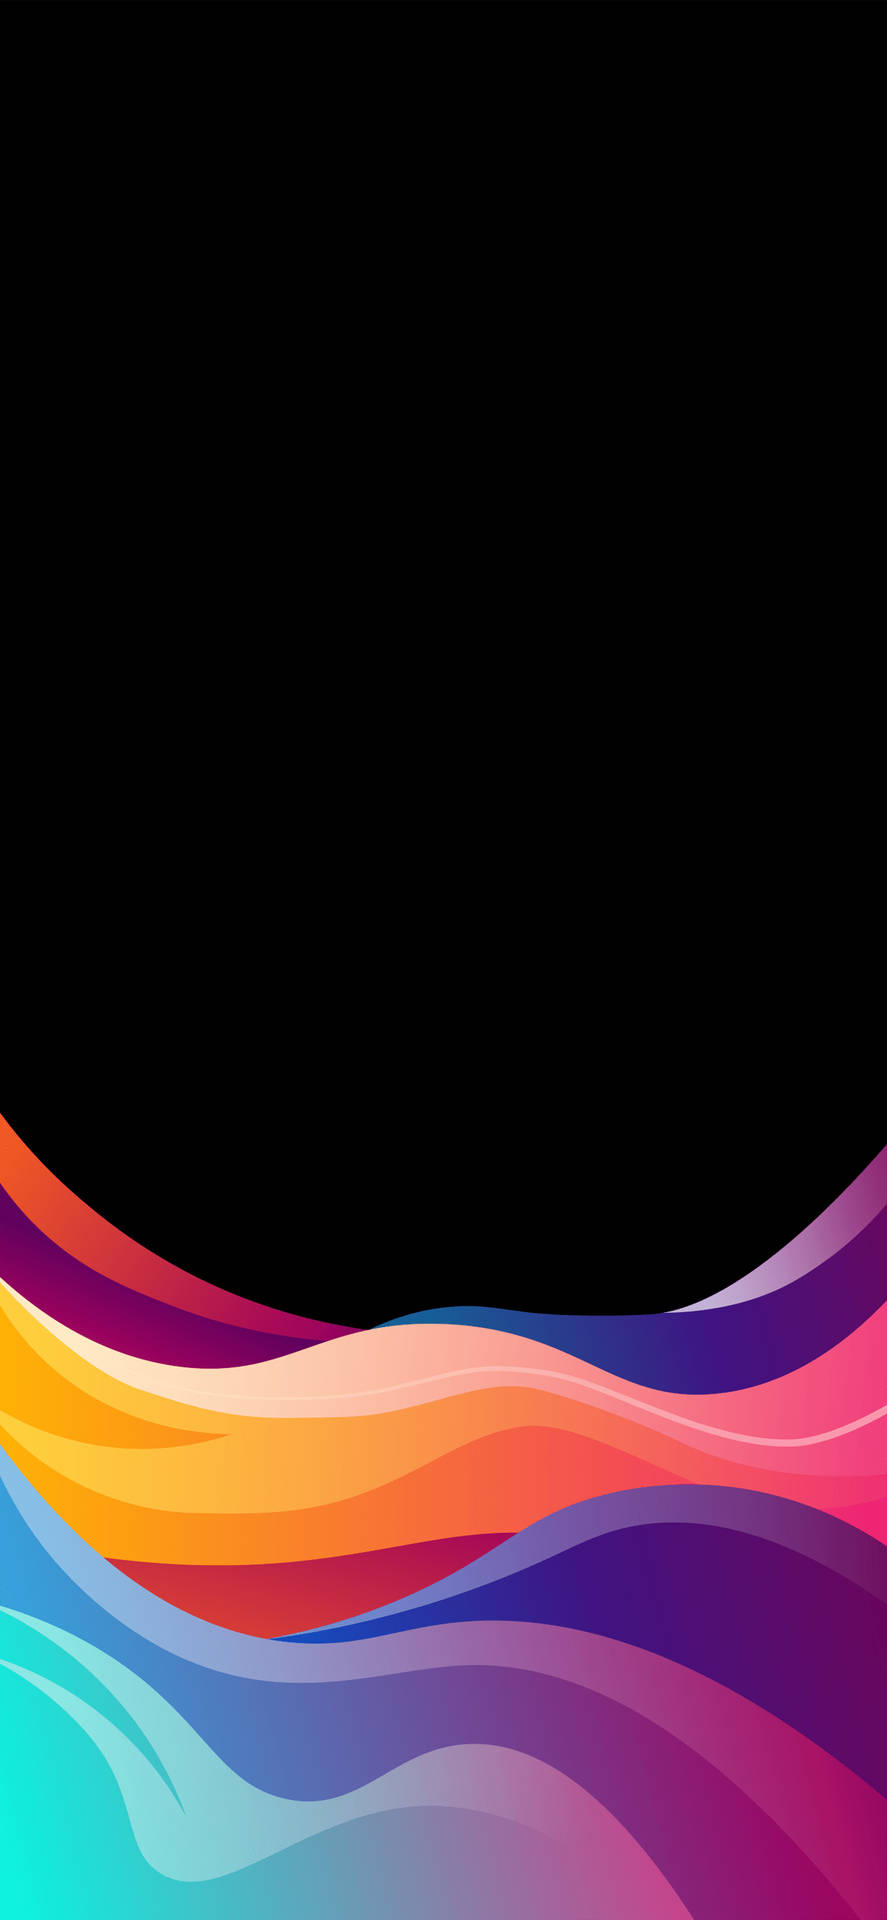 Brighten up your day with iPhone XR's Colorful Waves Wallpaper